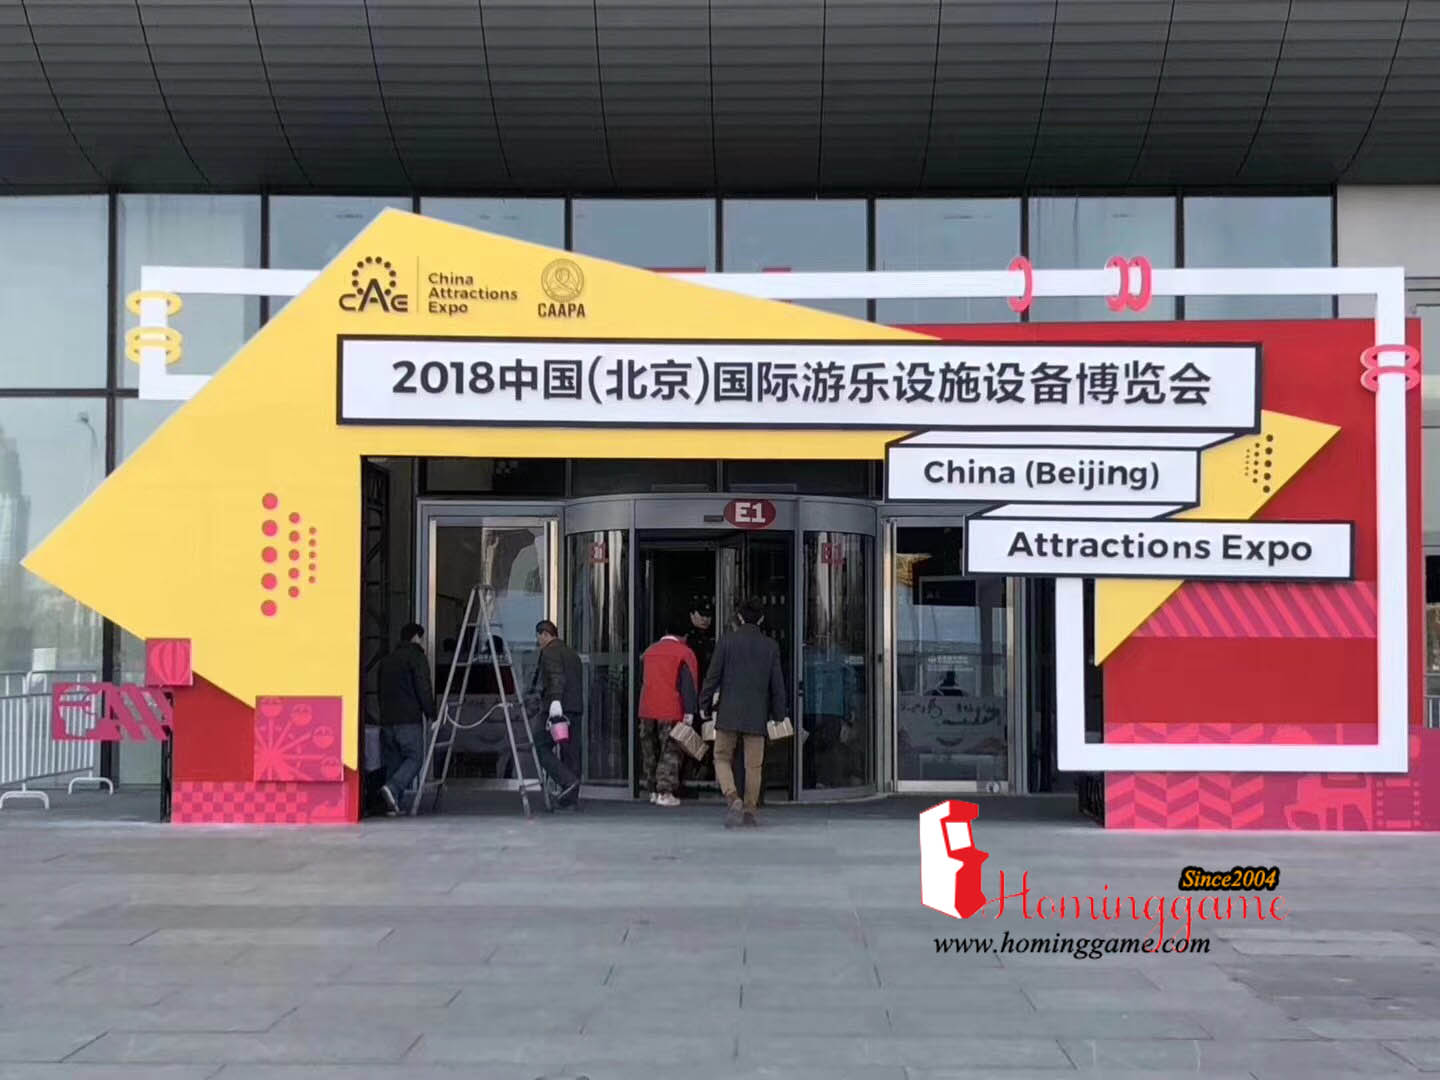 We Are in 2018 CAAPA BeiJing Game Exhibition Show,CAAPA,game show,game exhibition show,game machine,arcade game machine,coin operated game machine,prize game machine,coin pusher,simulator game machine,amusement park game equipment,family entertainment,entertainment game machine